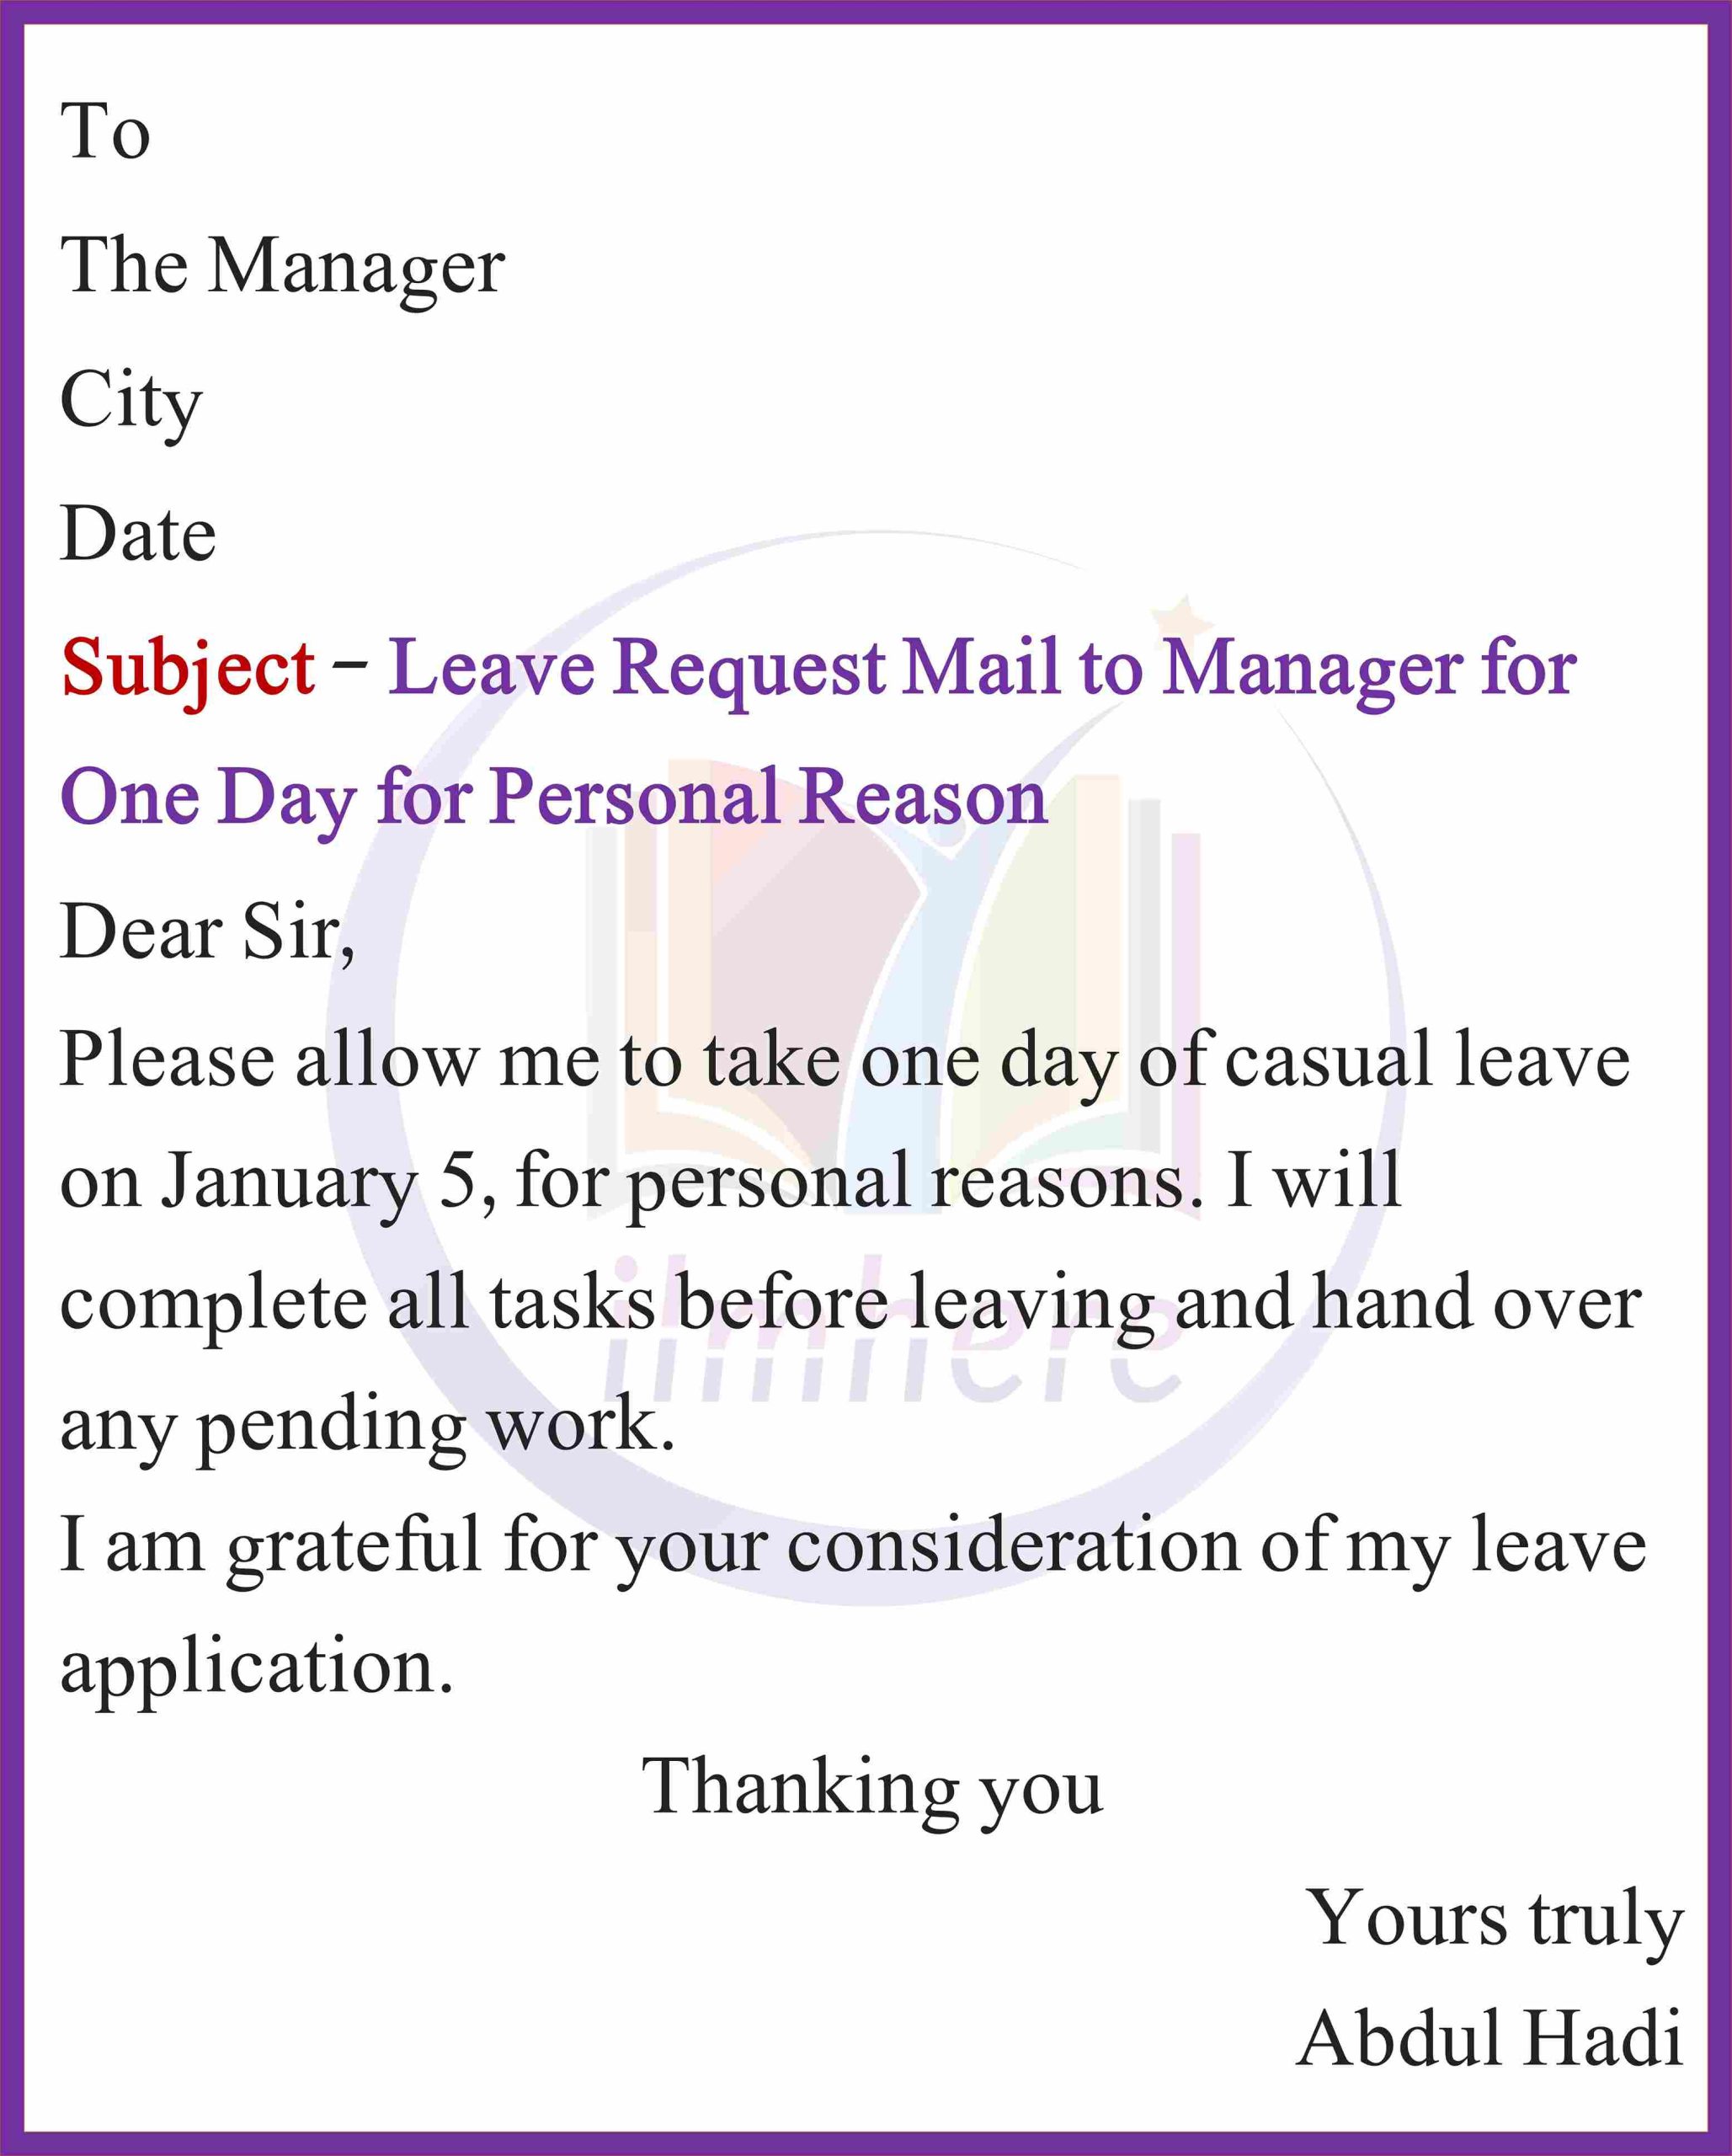 Leave Request Mail to Manager for One Day for Personal Reason  